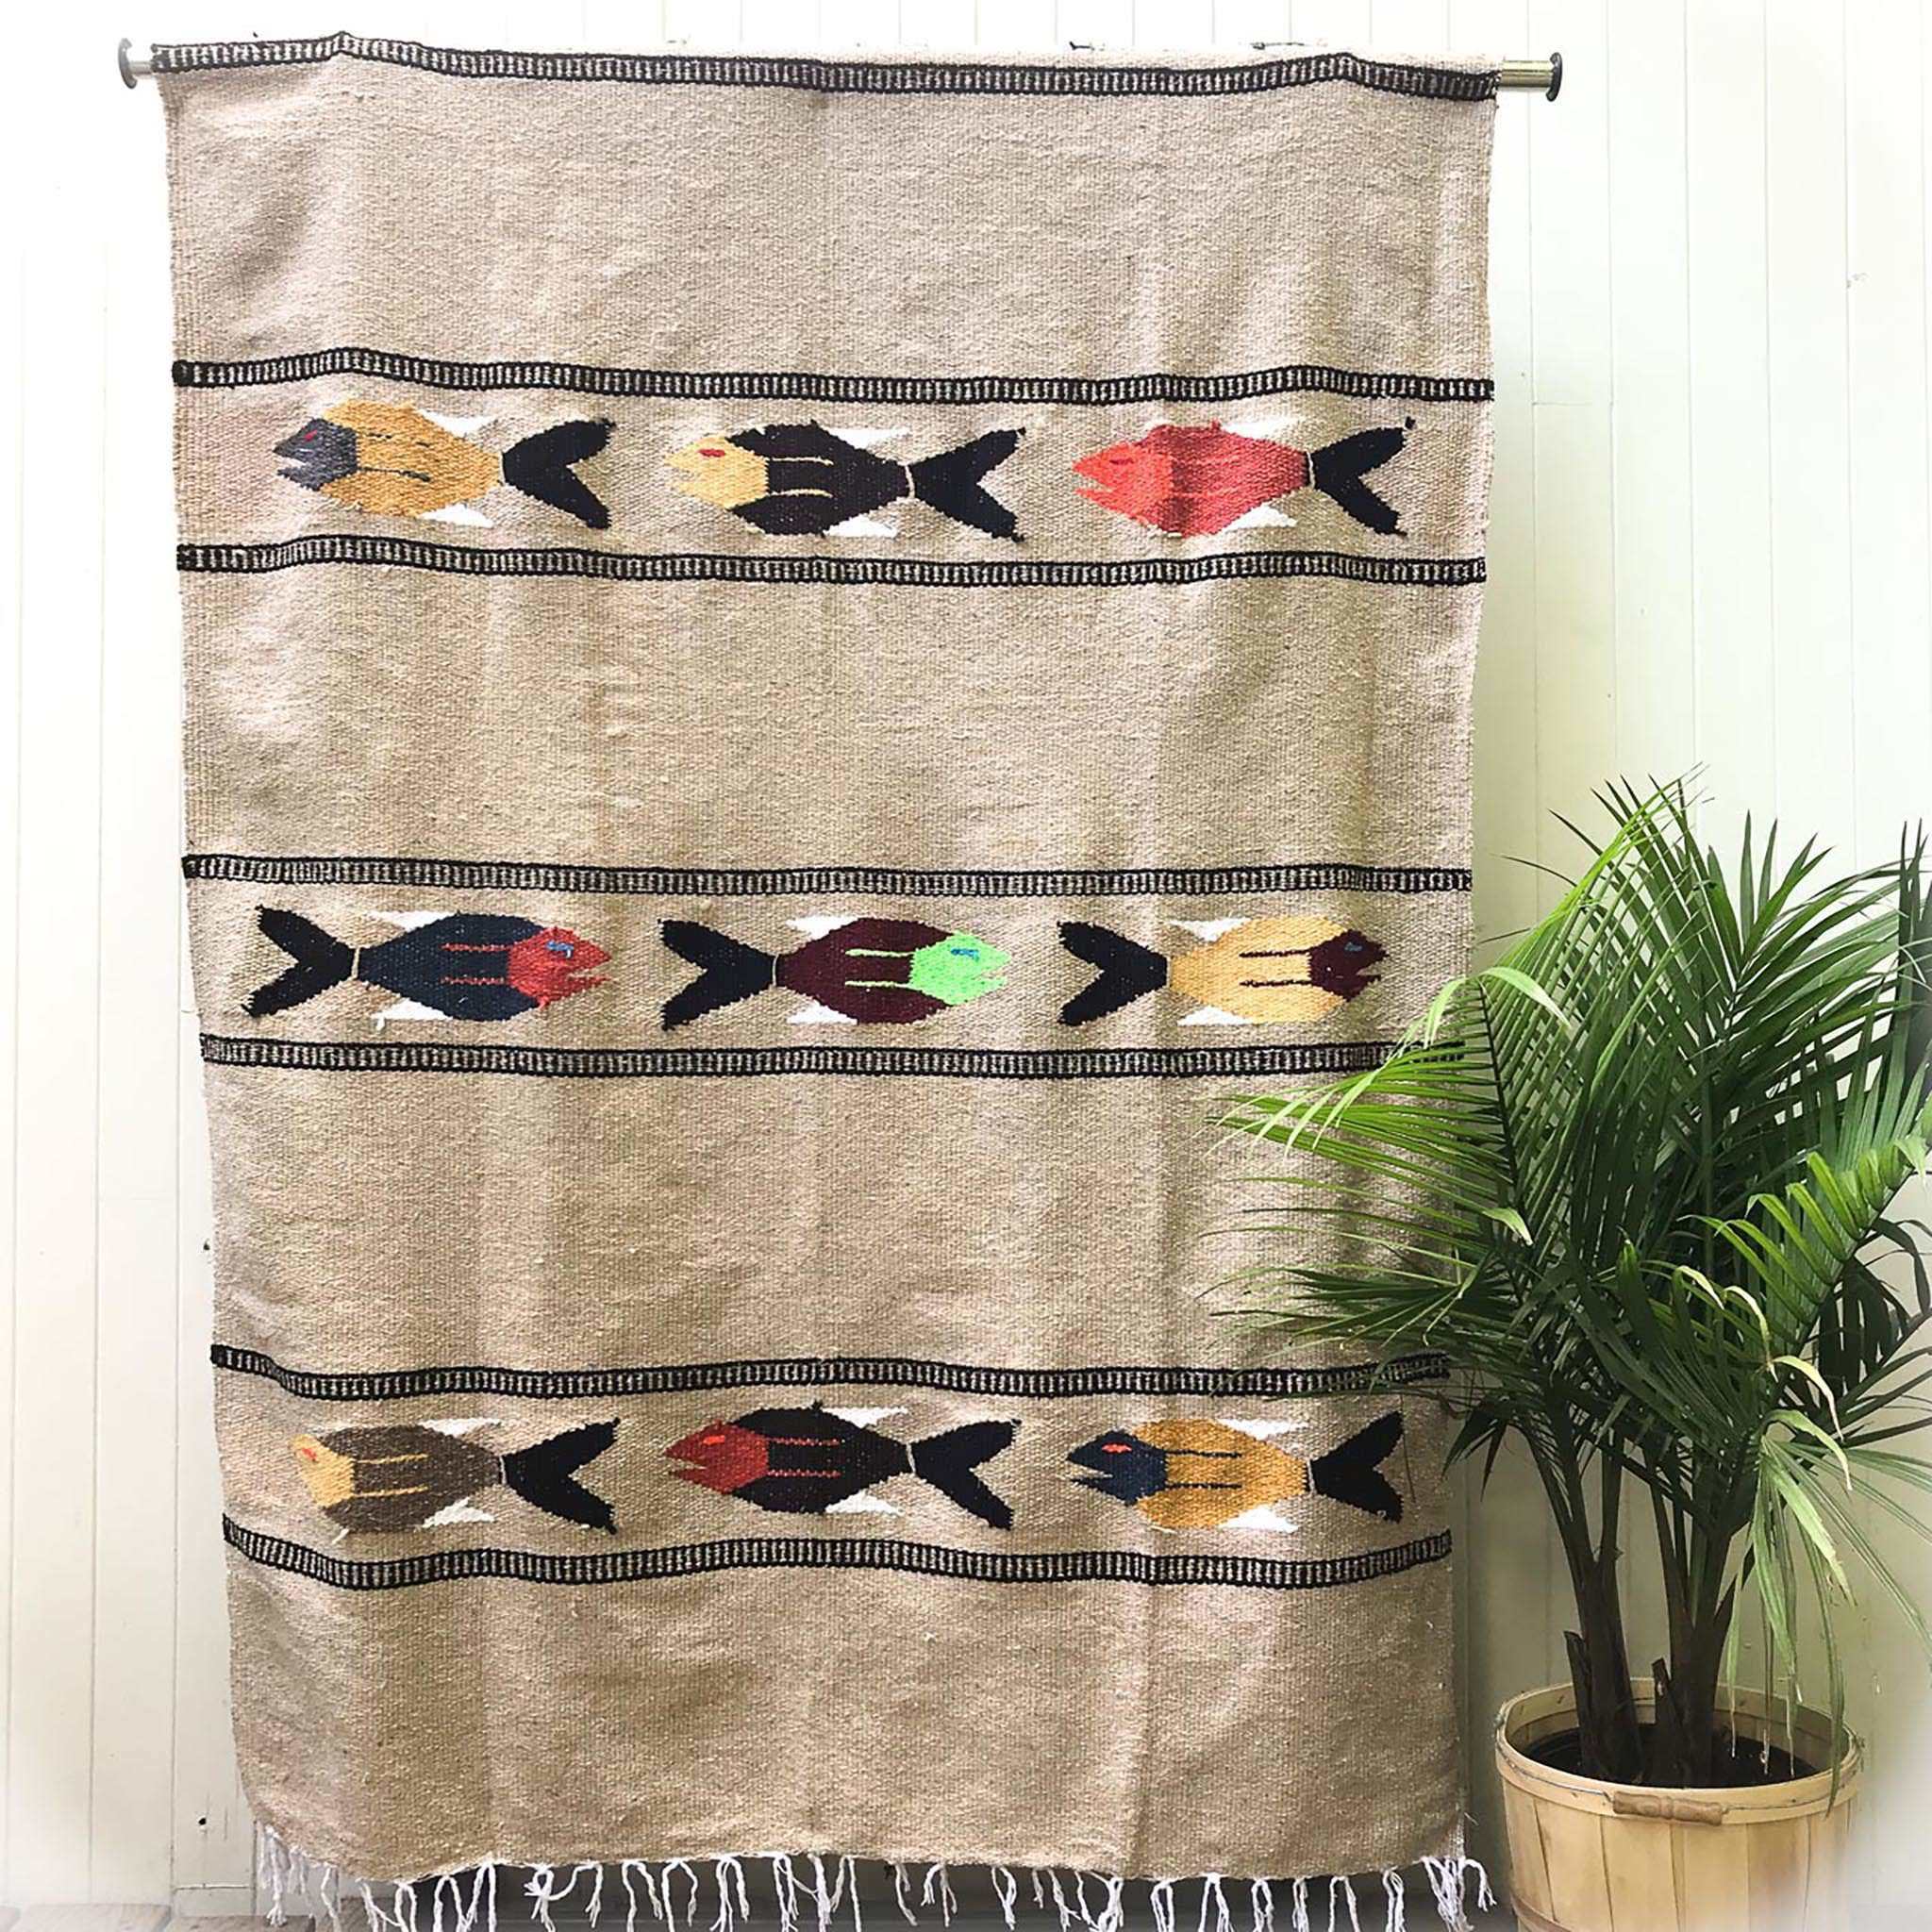 Woven blanket in natural tan with pattern of three multicolored fish in four alternating stripes, with white fringed edge, shown hanging against white wall with potted palm plant at side.